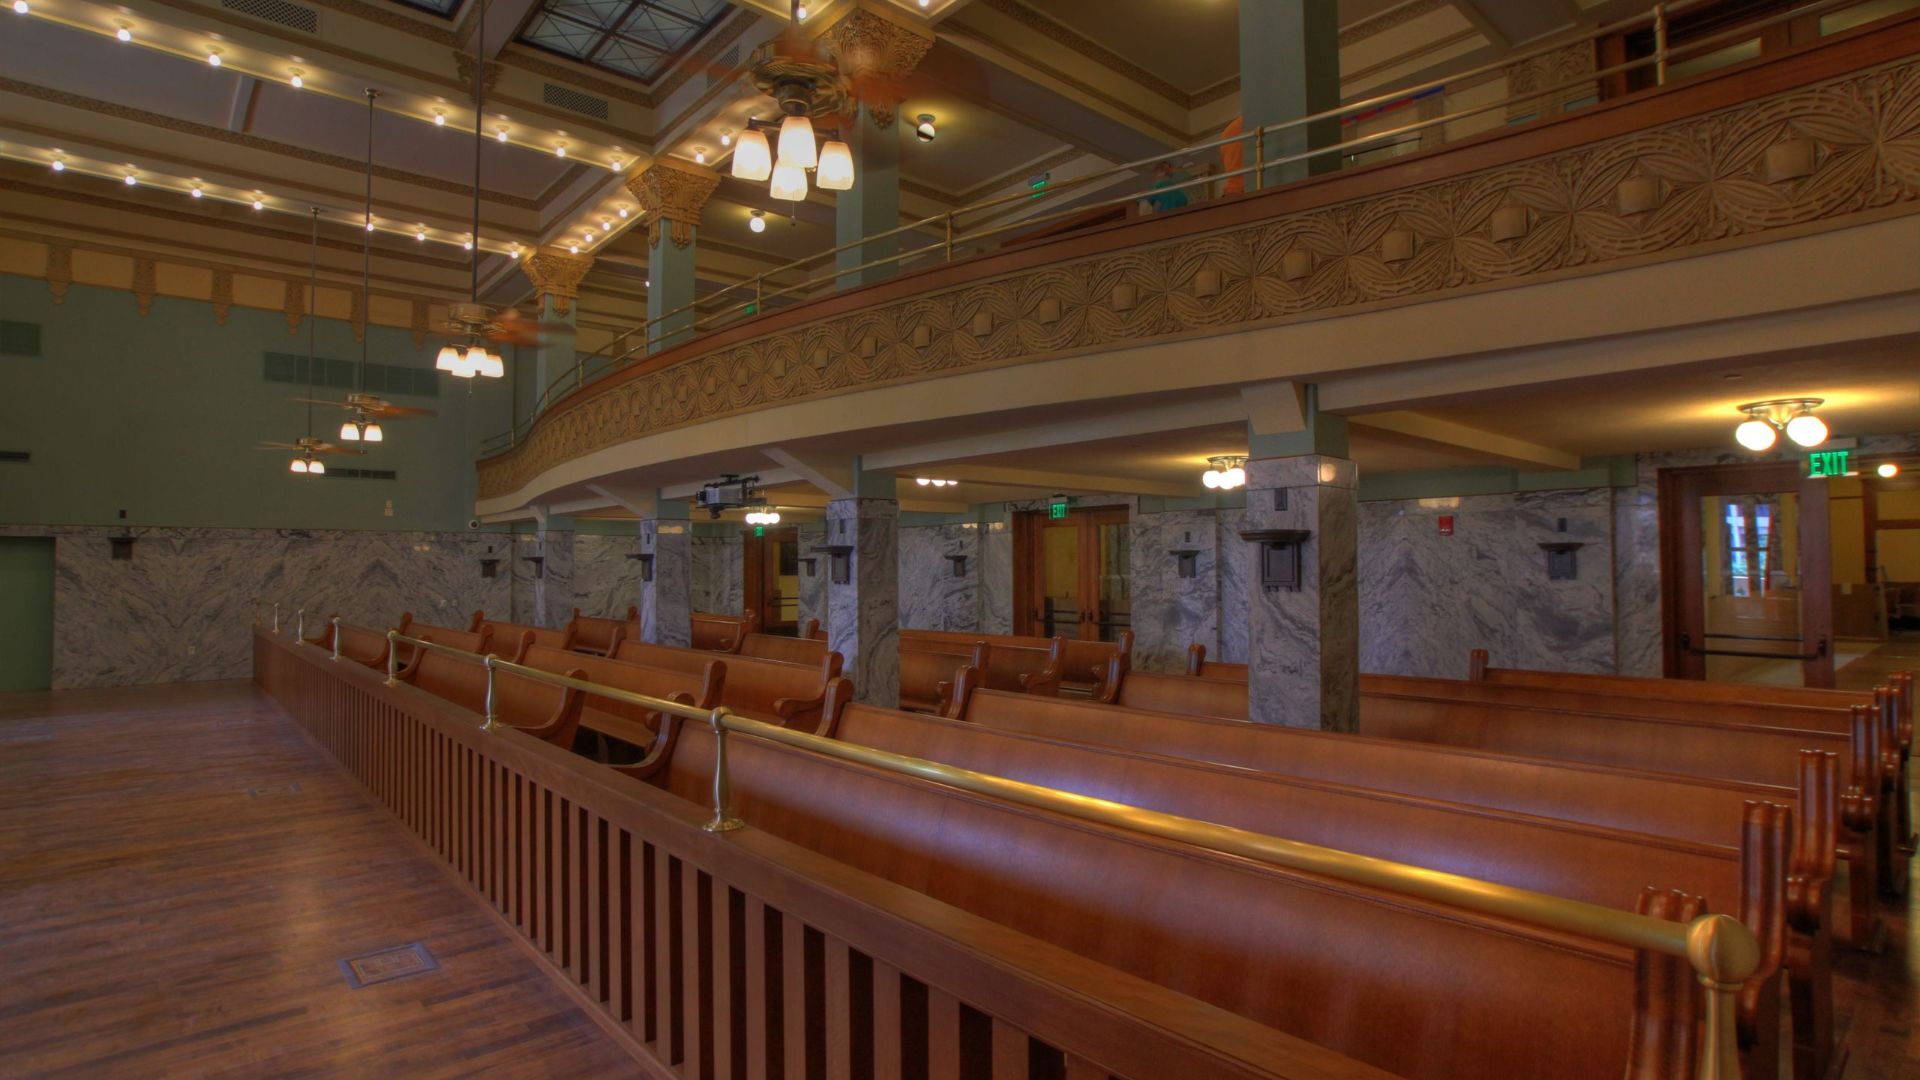 The fifth background, a 90's era courtroom. 